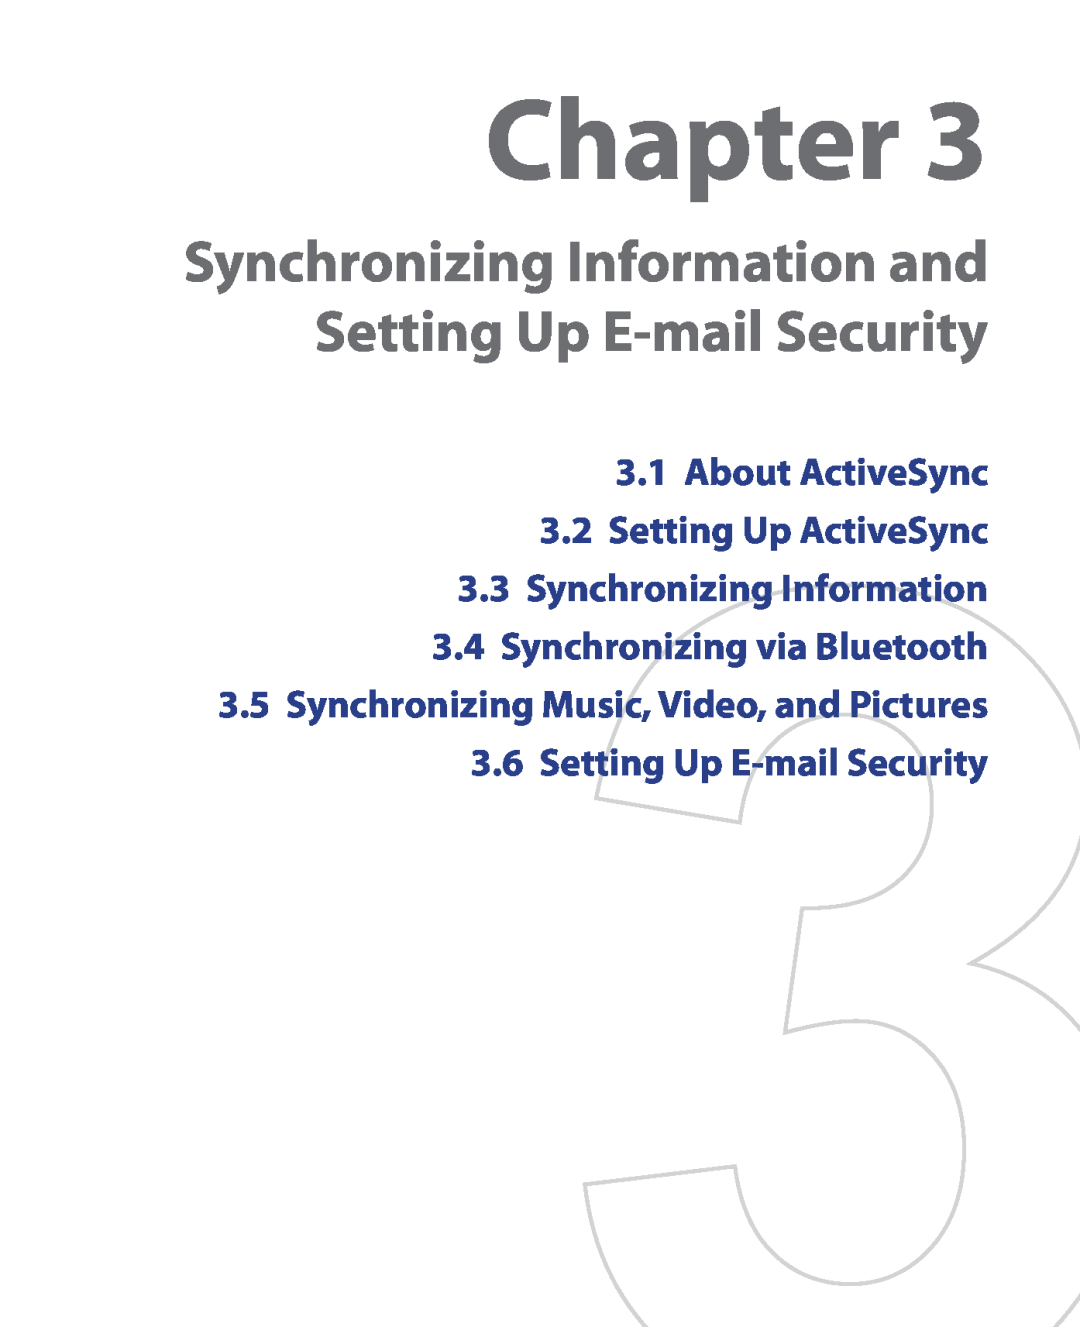 HTC HTC S621 Synchronizing Information and Setting Up E-mail Security, About ActiveSync 3.2 Setting Up ActiveSync, Chapter 